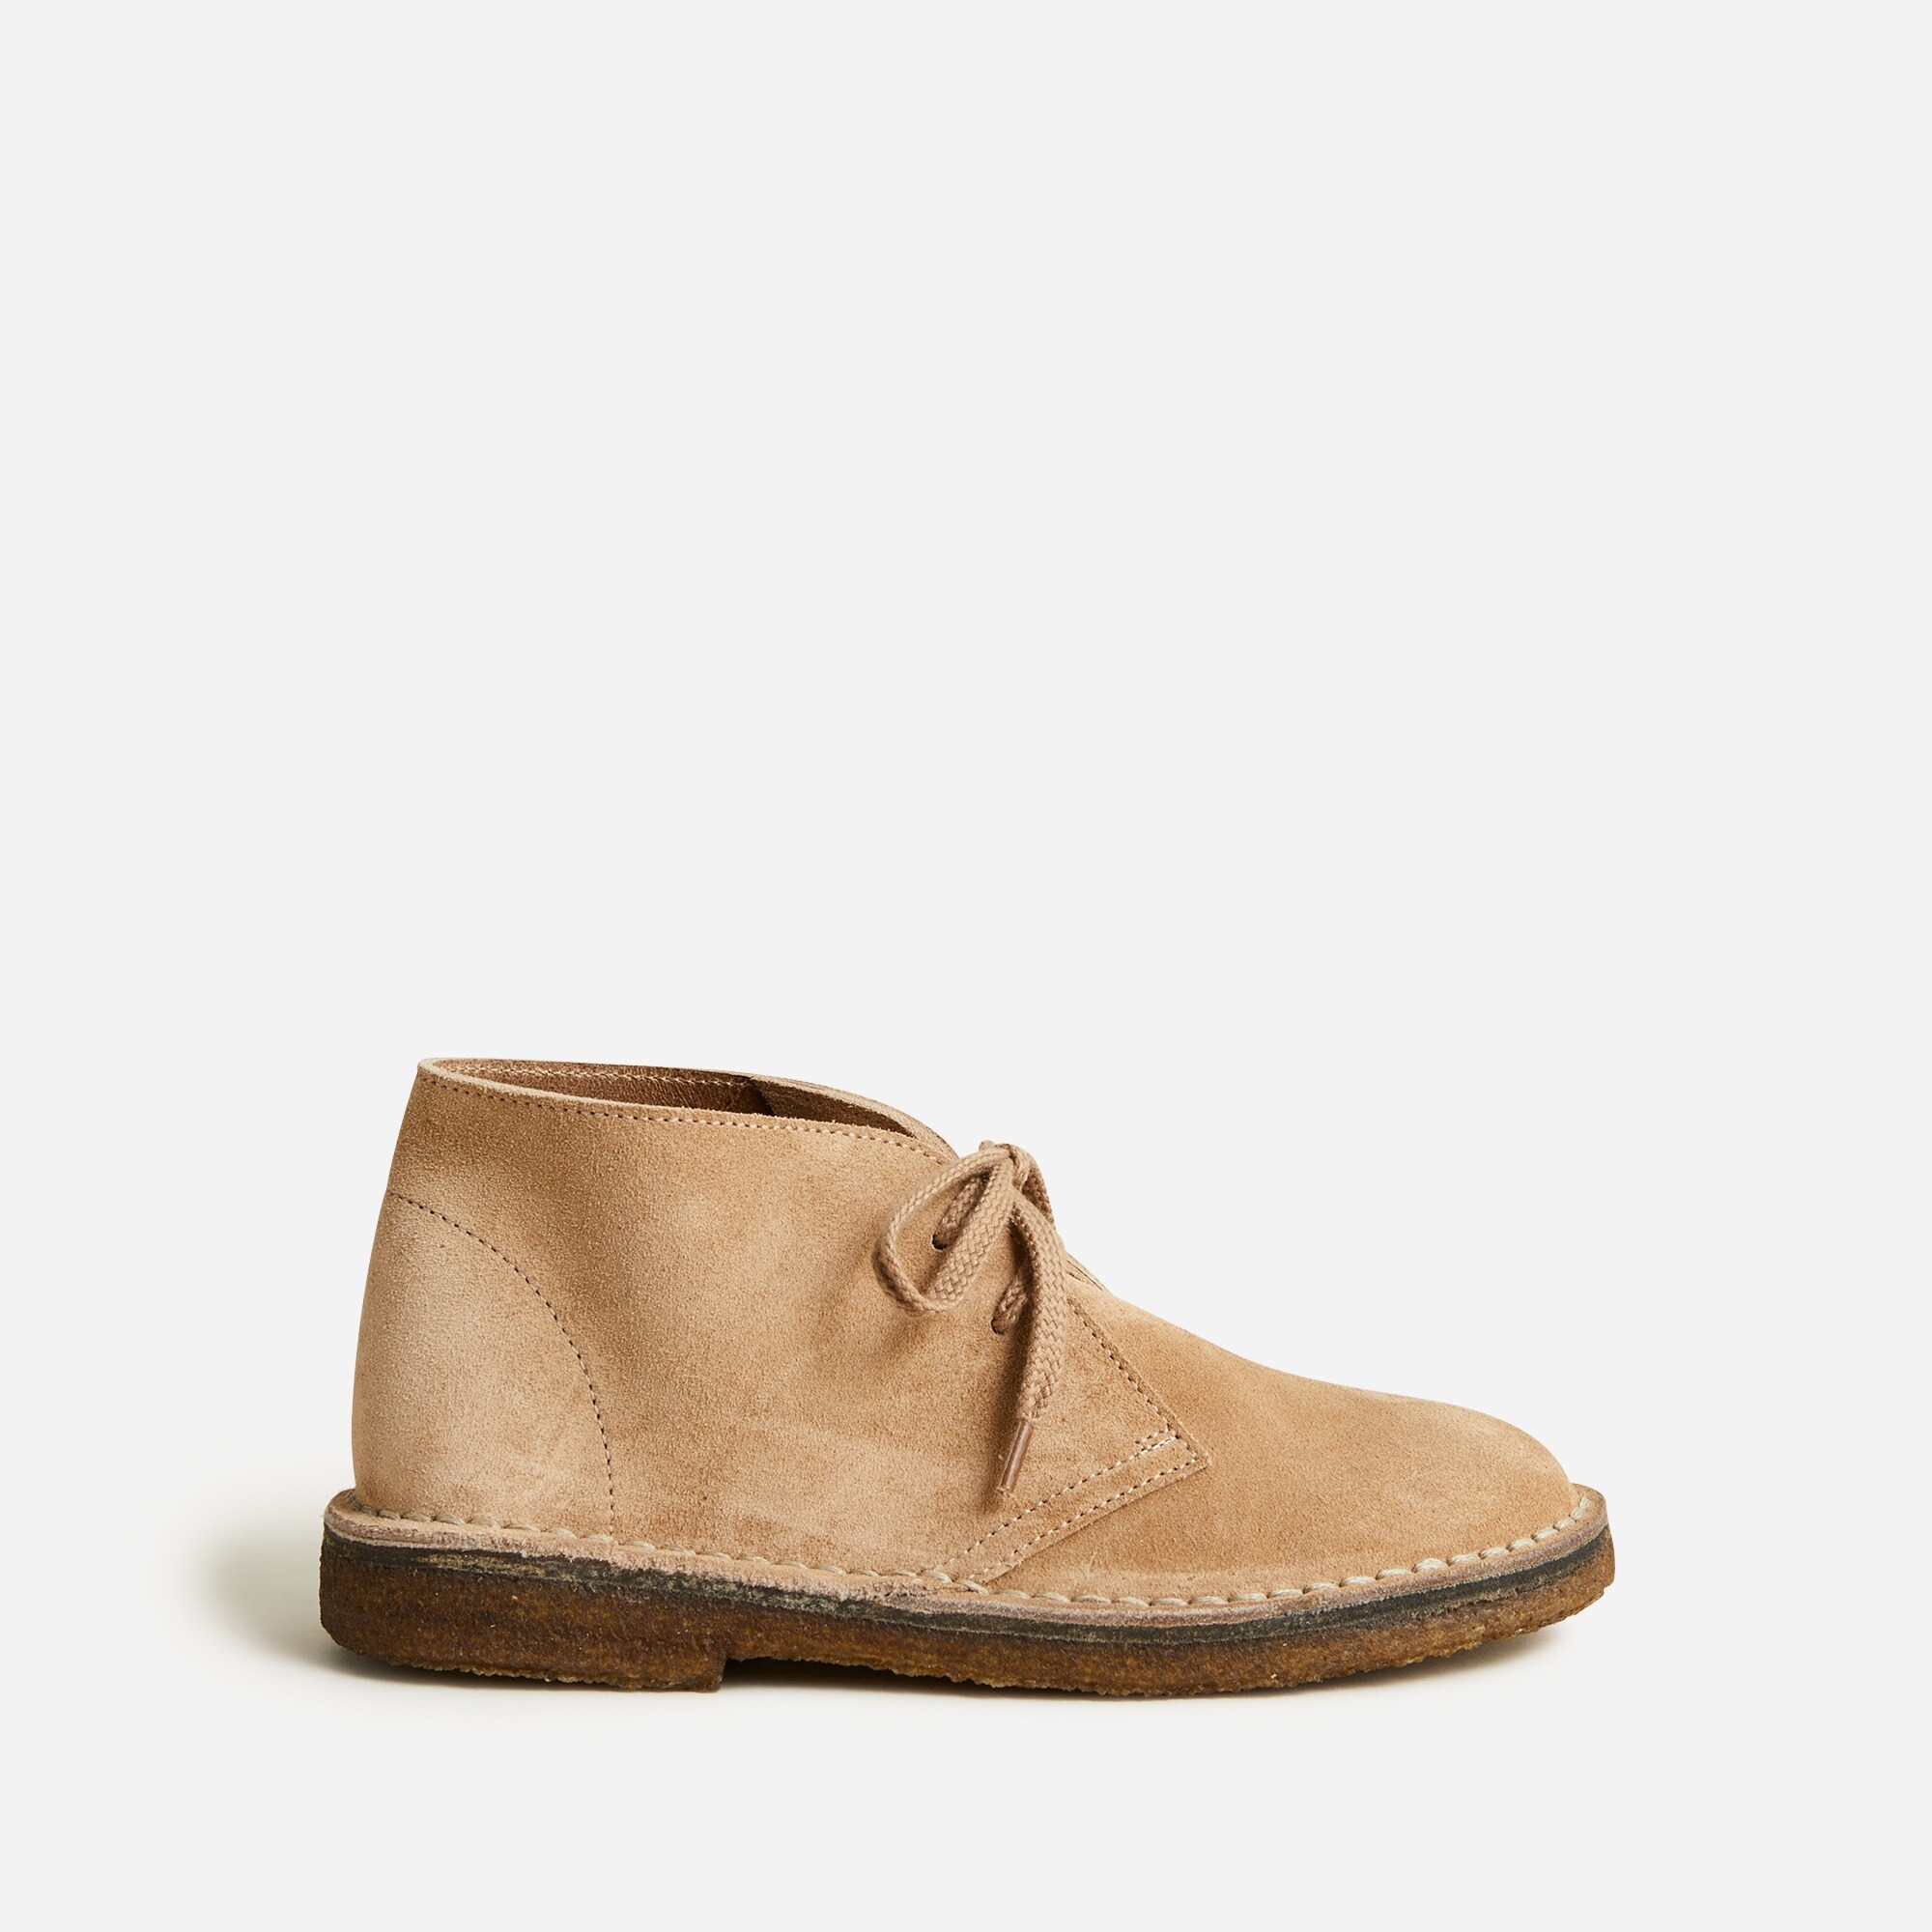  Kids' 1990 MacAlister boots in suede